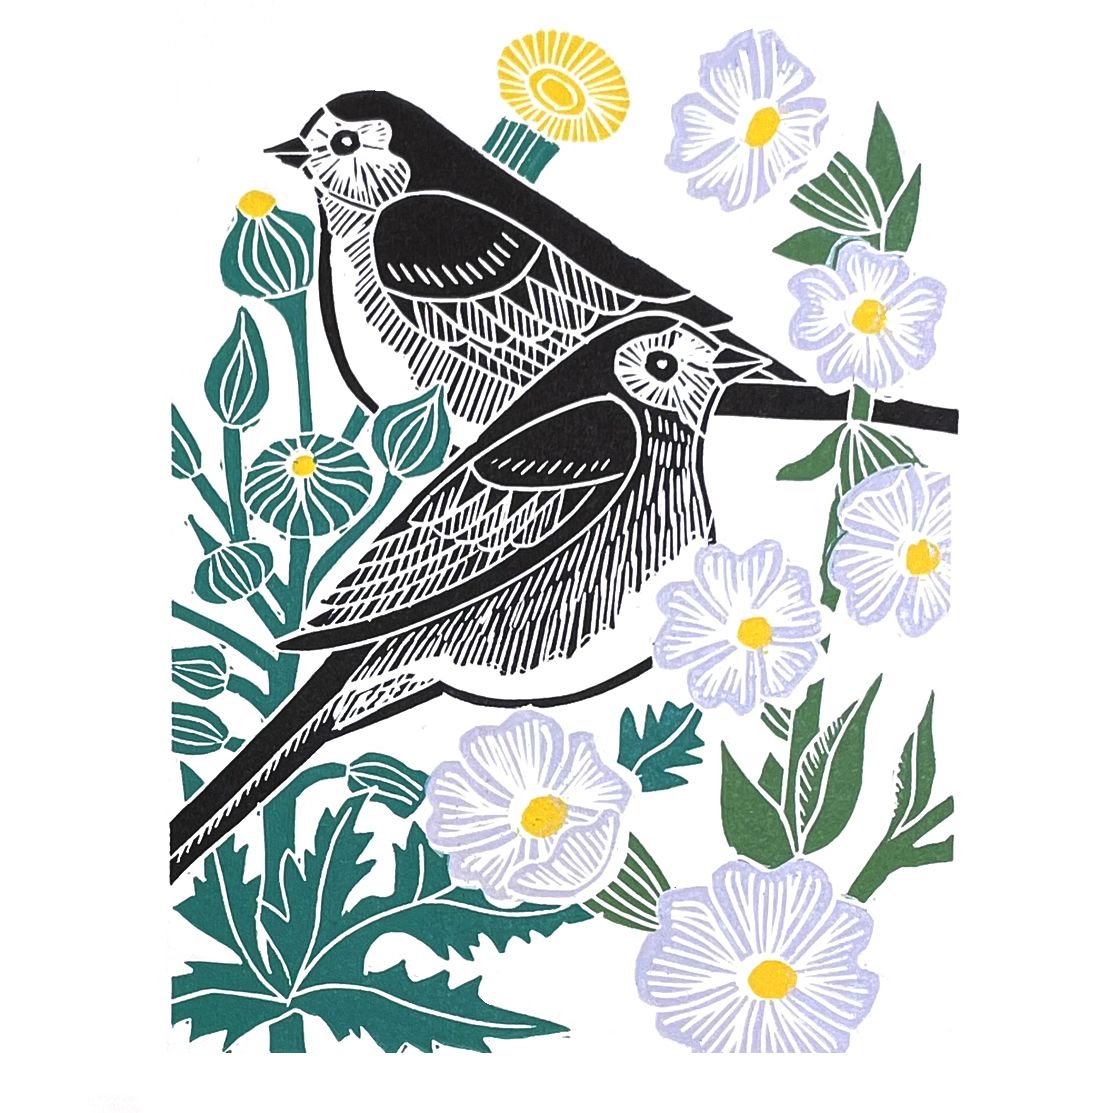 Summer Wagtails by Kate Heiss